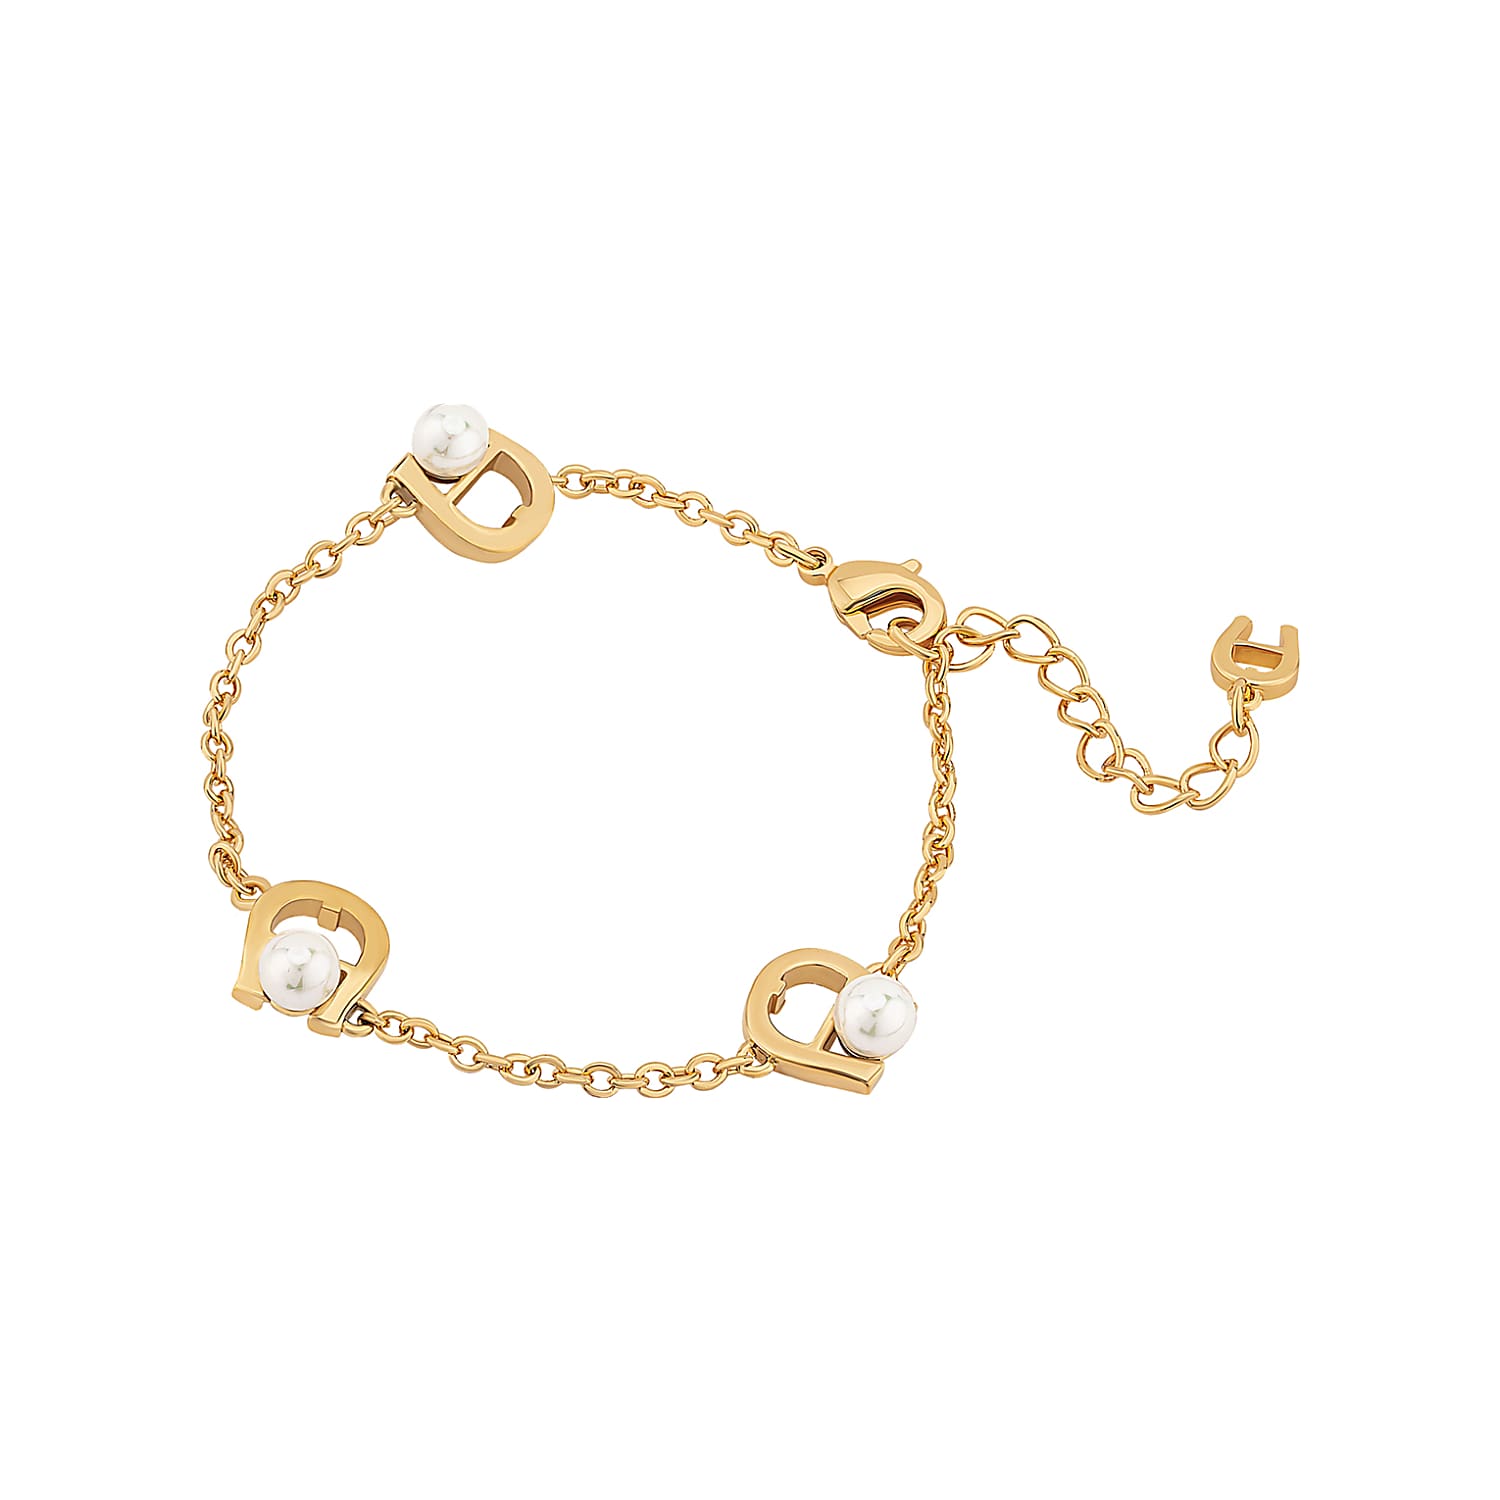 A-logo bracelet with pearls